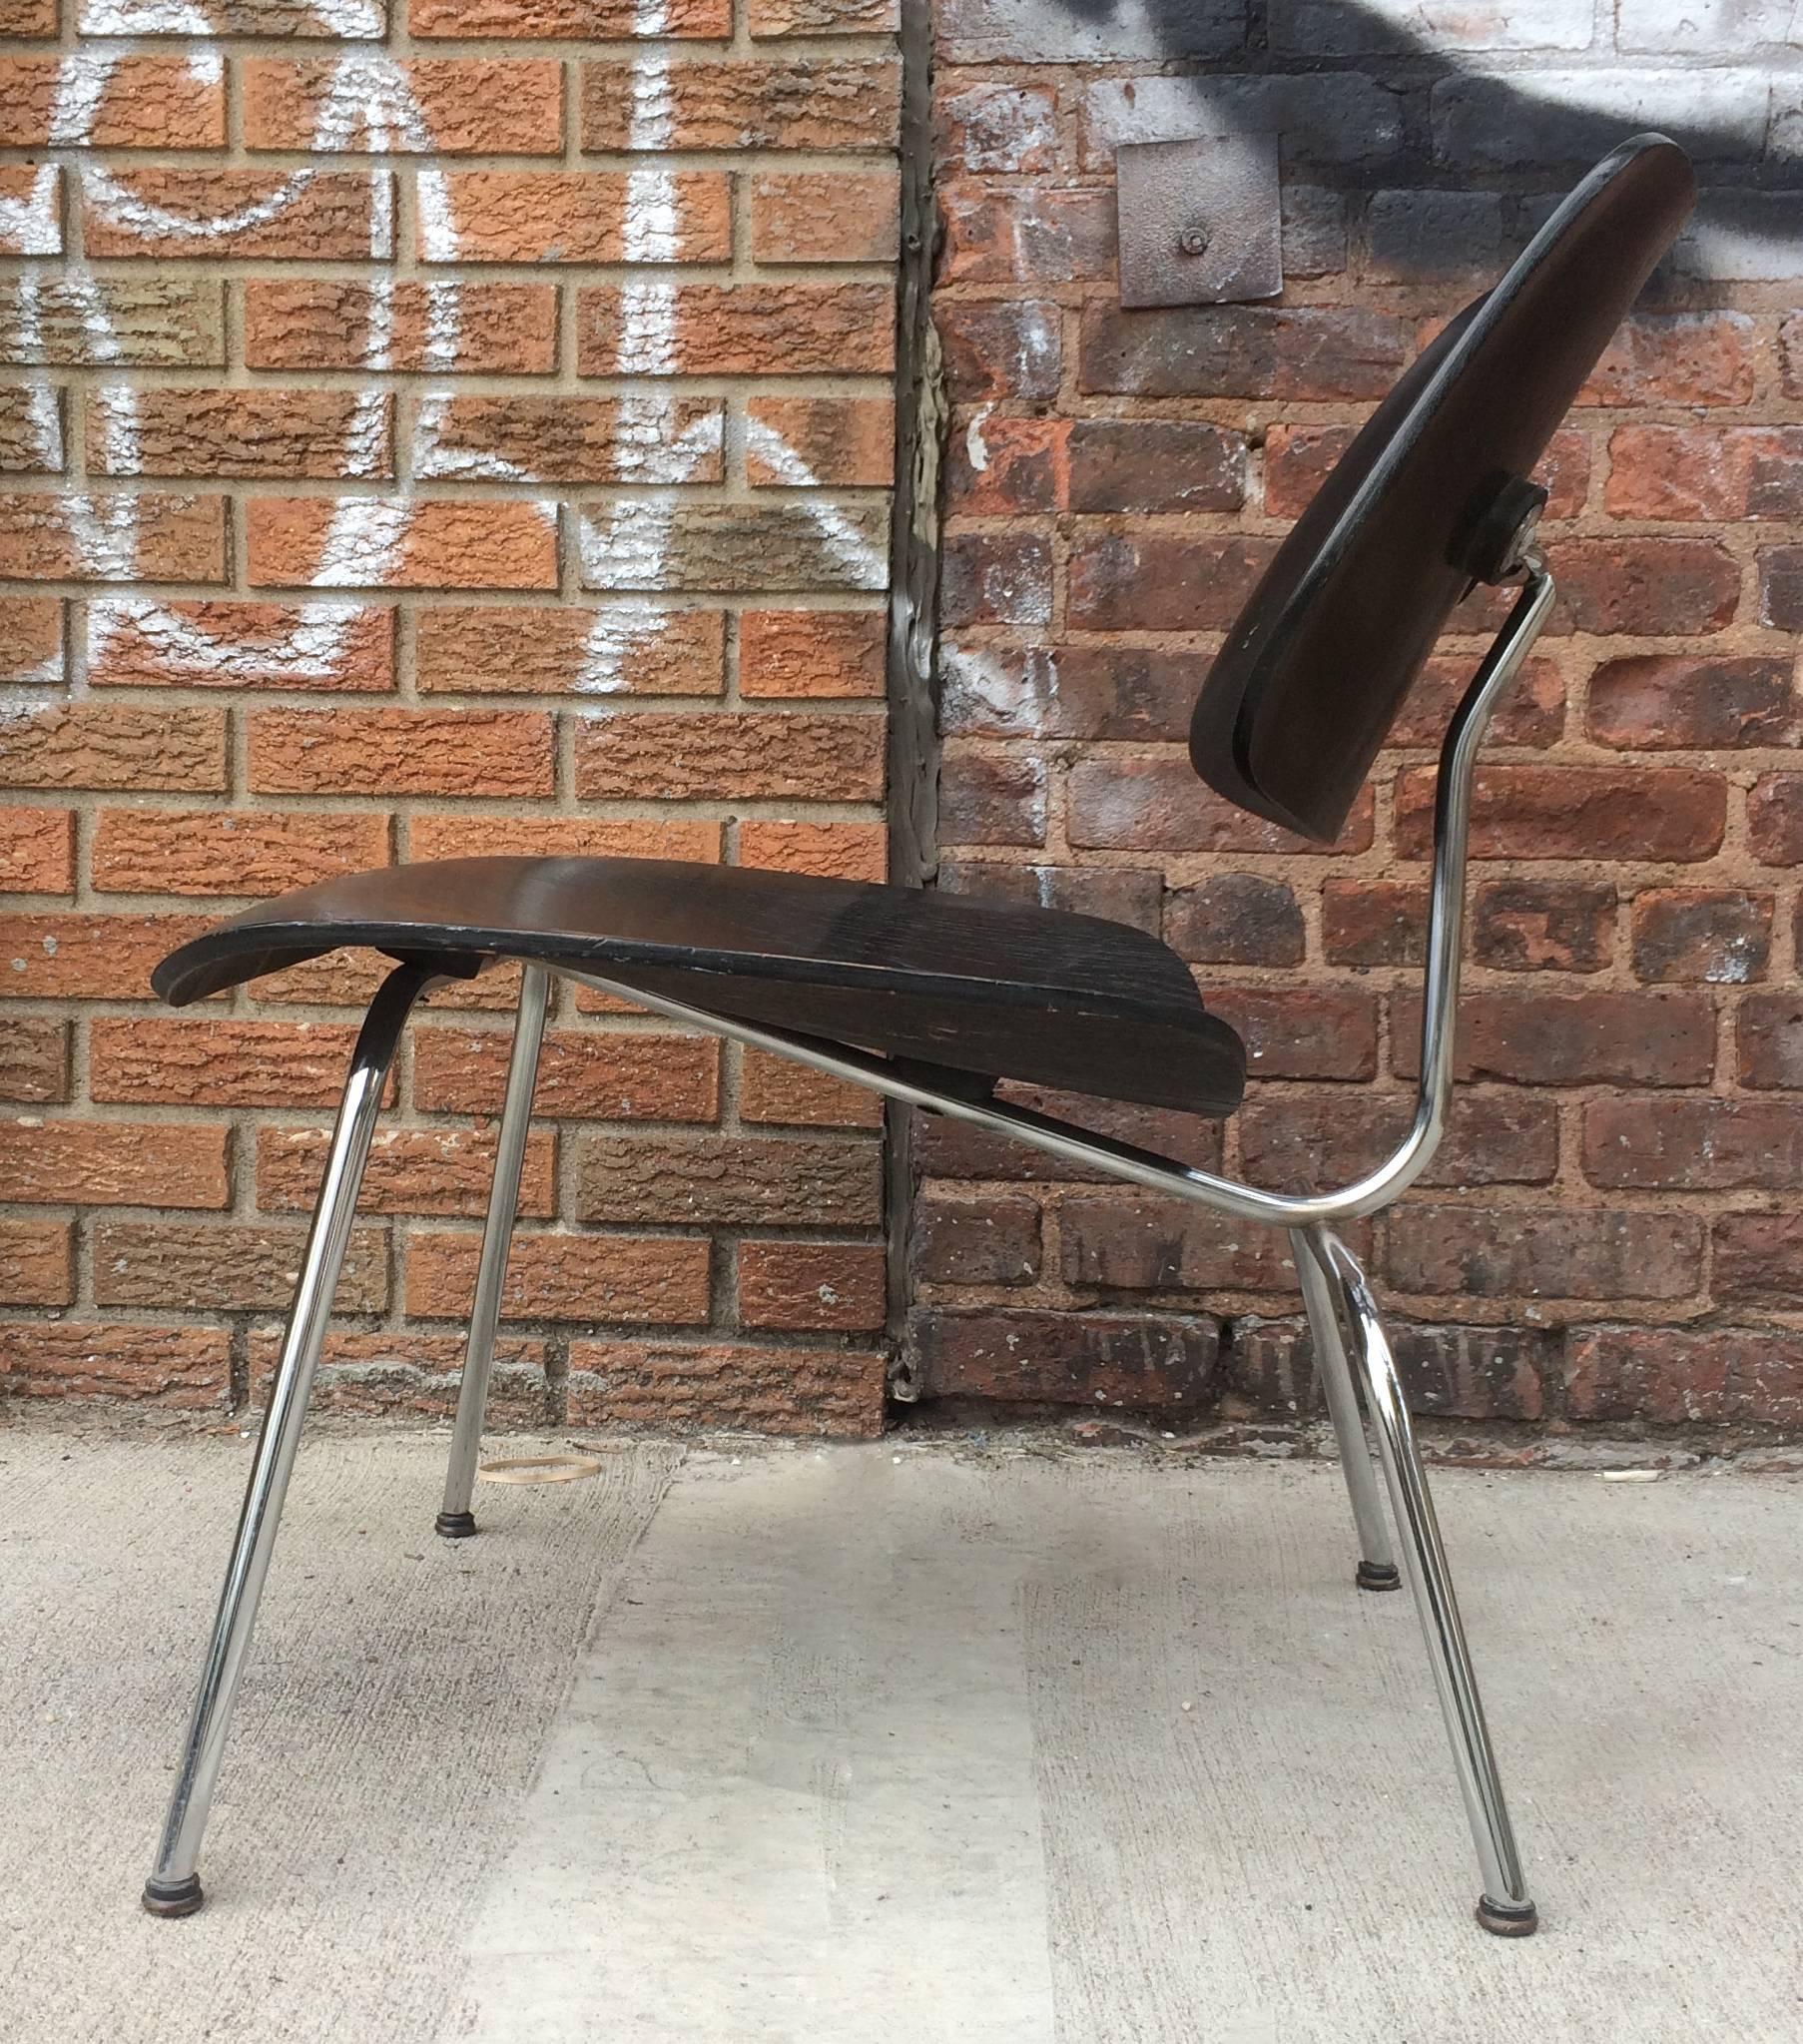 Eames Evans aniline dyed black LCM. Dates to 1940s. No pitting to chrome frame. No dings or damage to wood. In exceptional vintage condition. All original mounts, screws, and screw in domes of silence glides. Nearly immaculate. Unrestored original